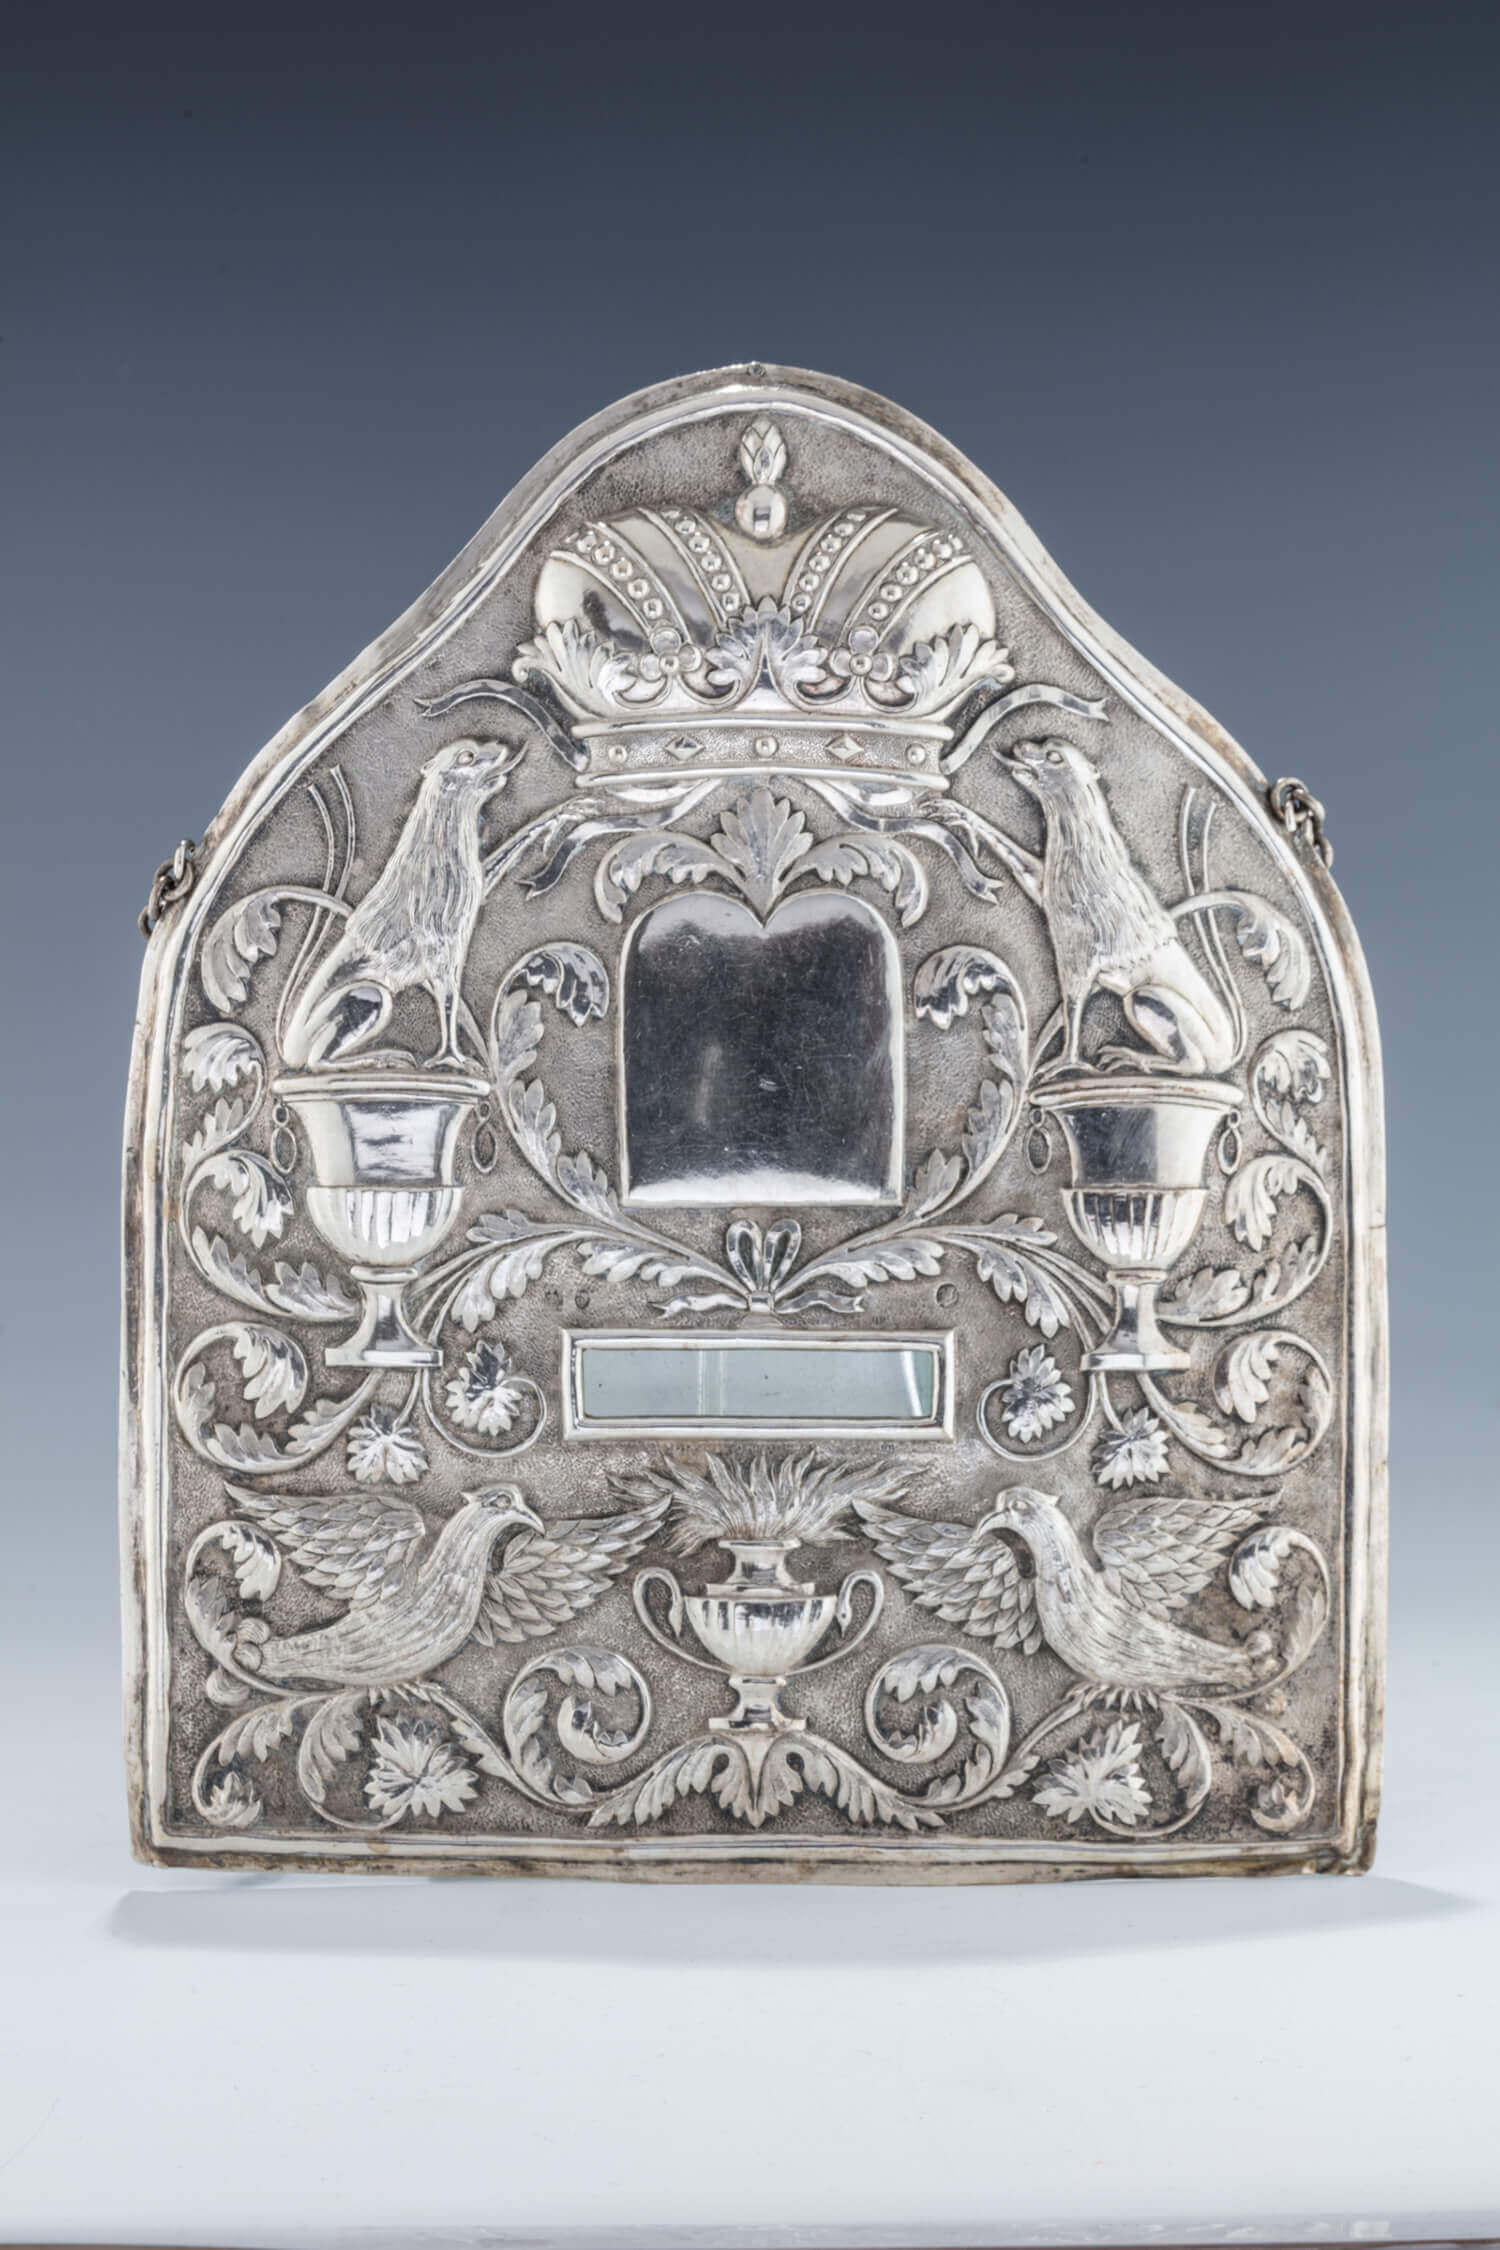 100. A RARE AND IMPORTANT SILVER TORAH SHIELD BY FRANZ KALTENMARKER